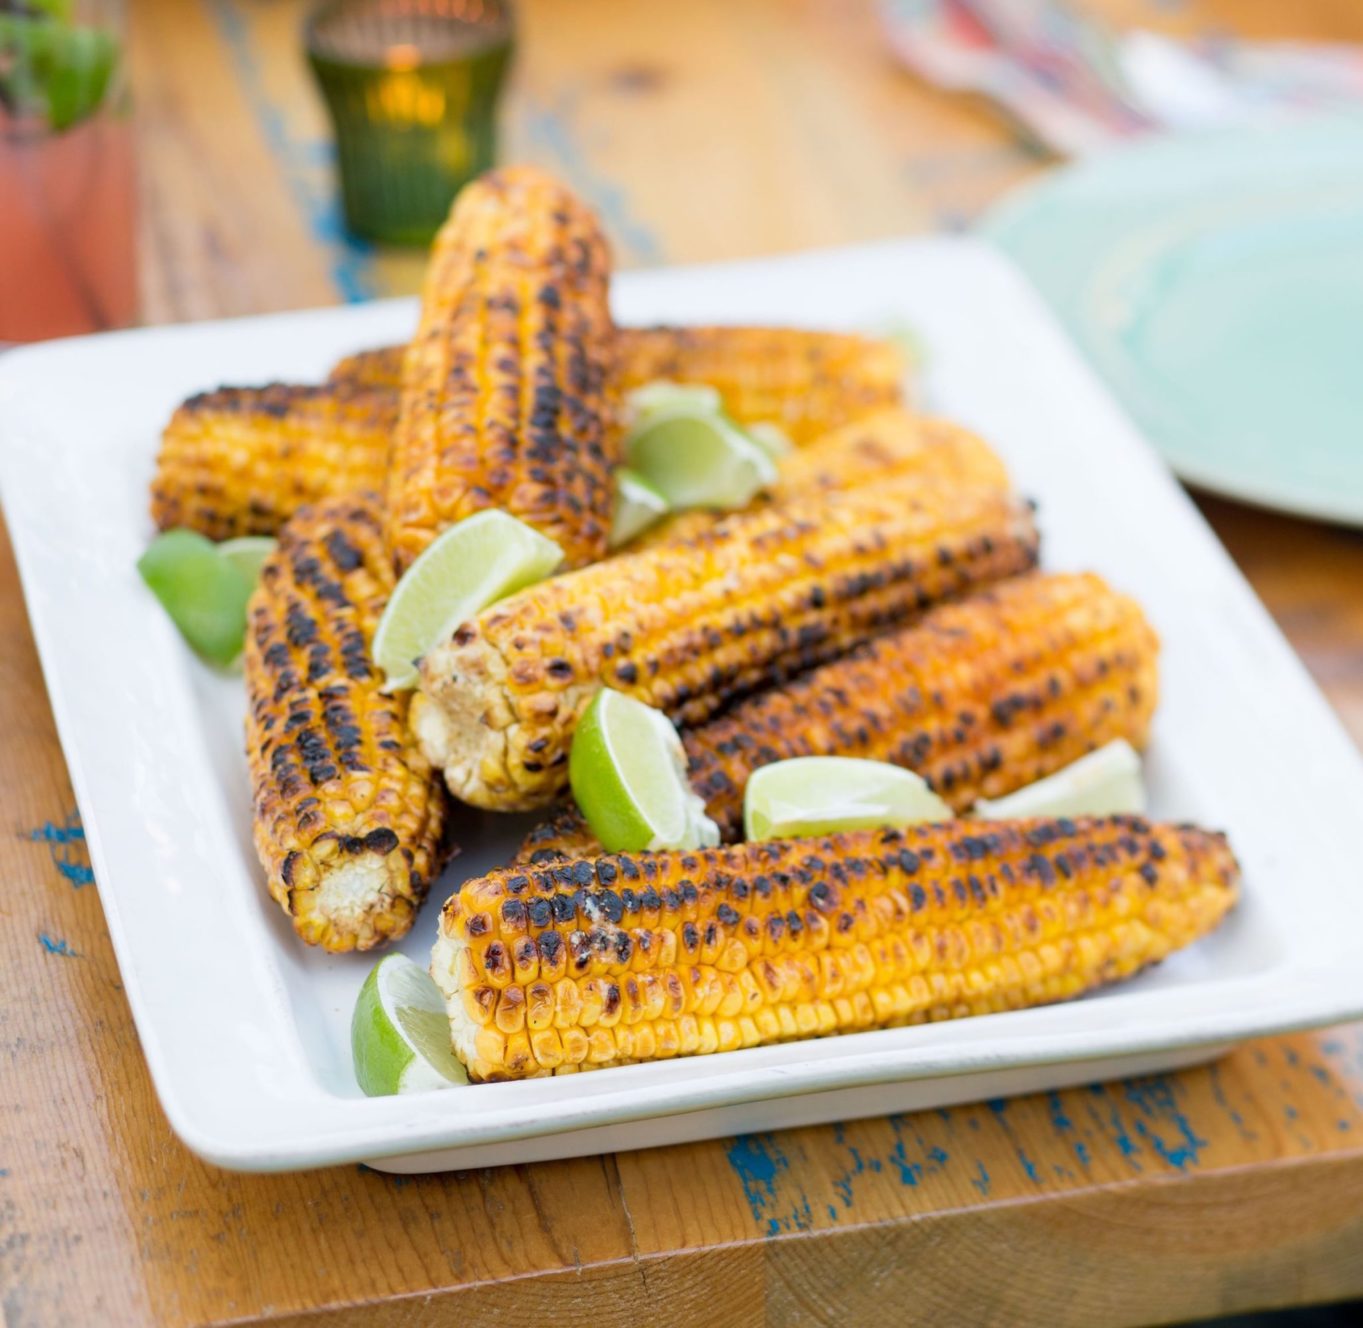 Grilled Corn Side Dish Indian Style Grilled Corn Recipe With Spices And Butter,Spoons Game Rules